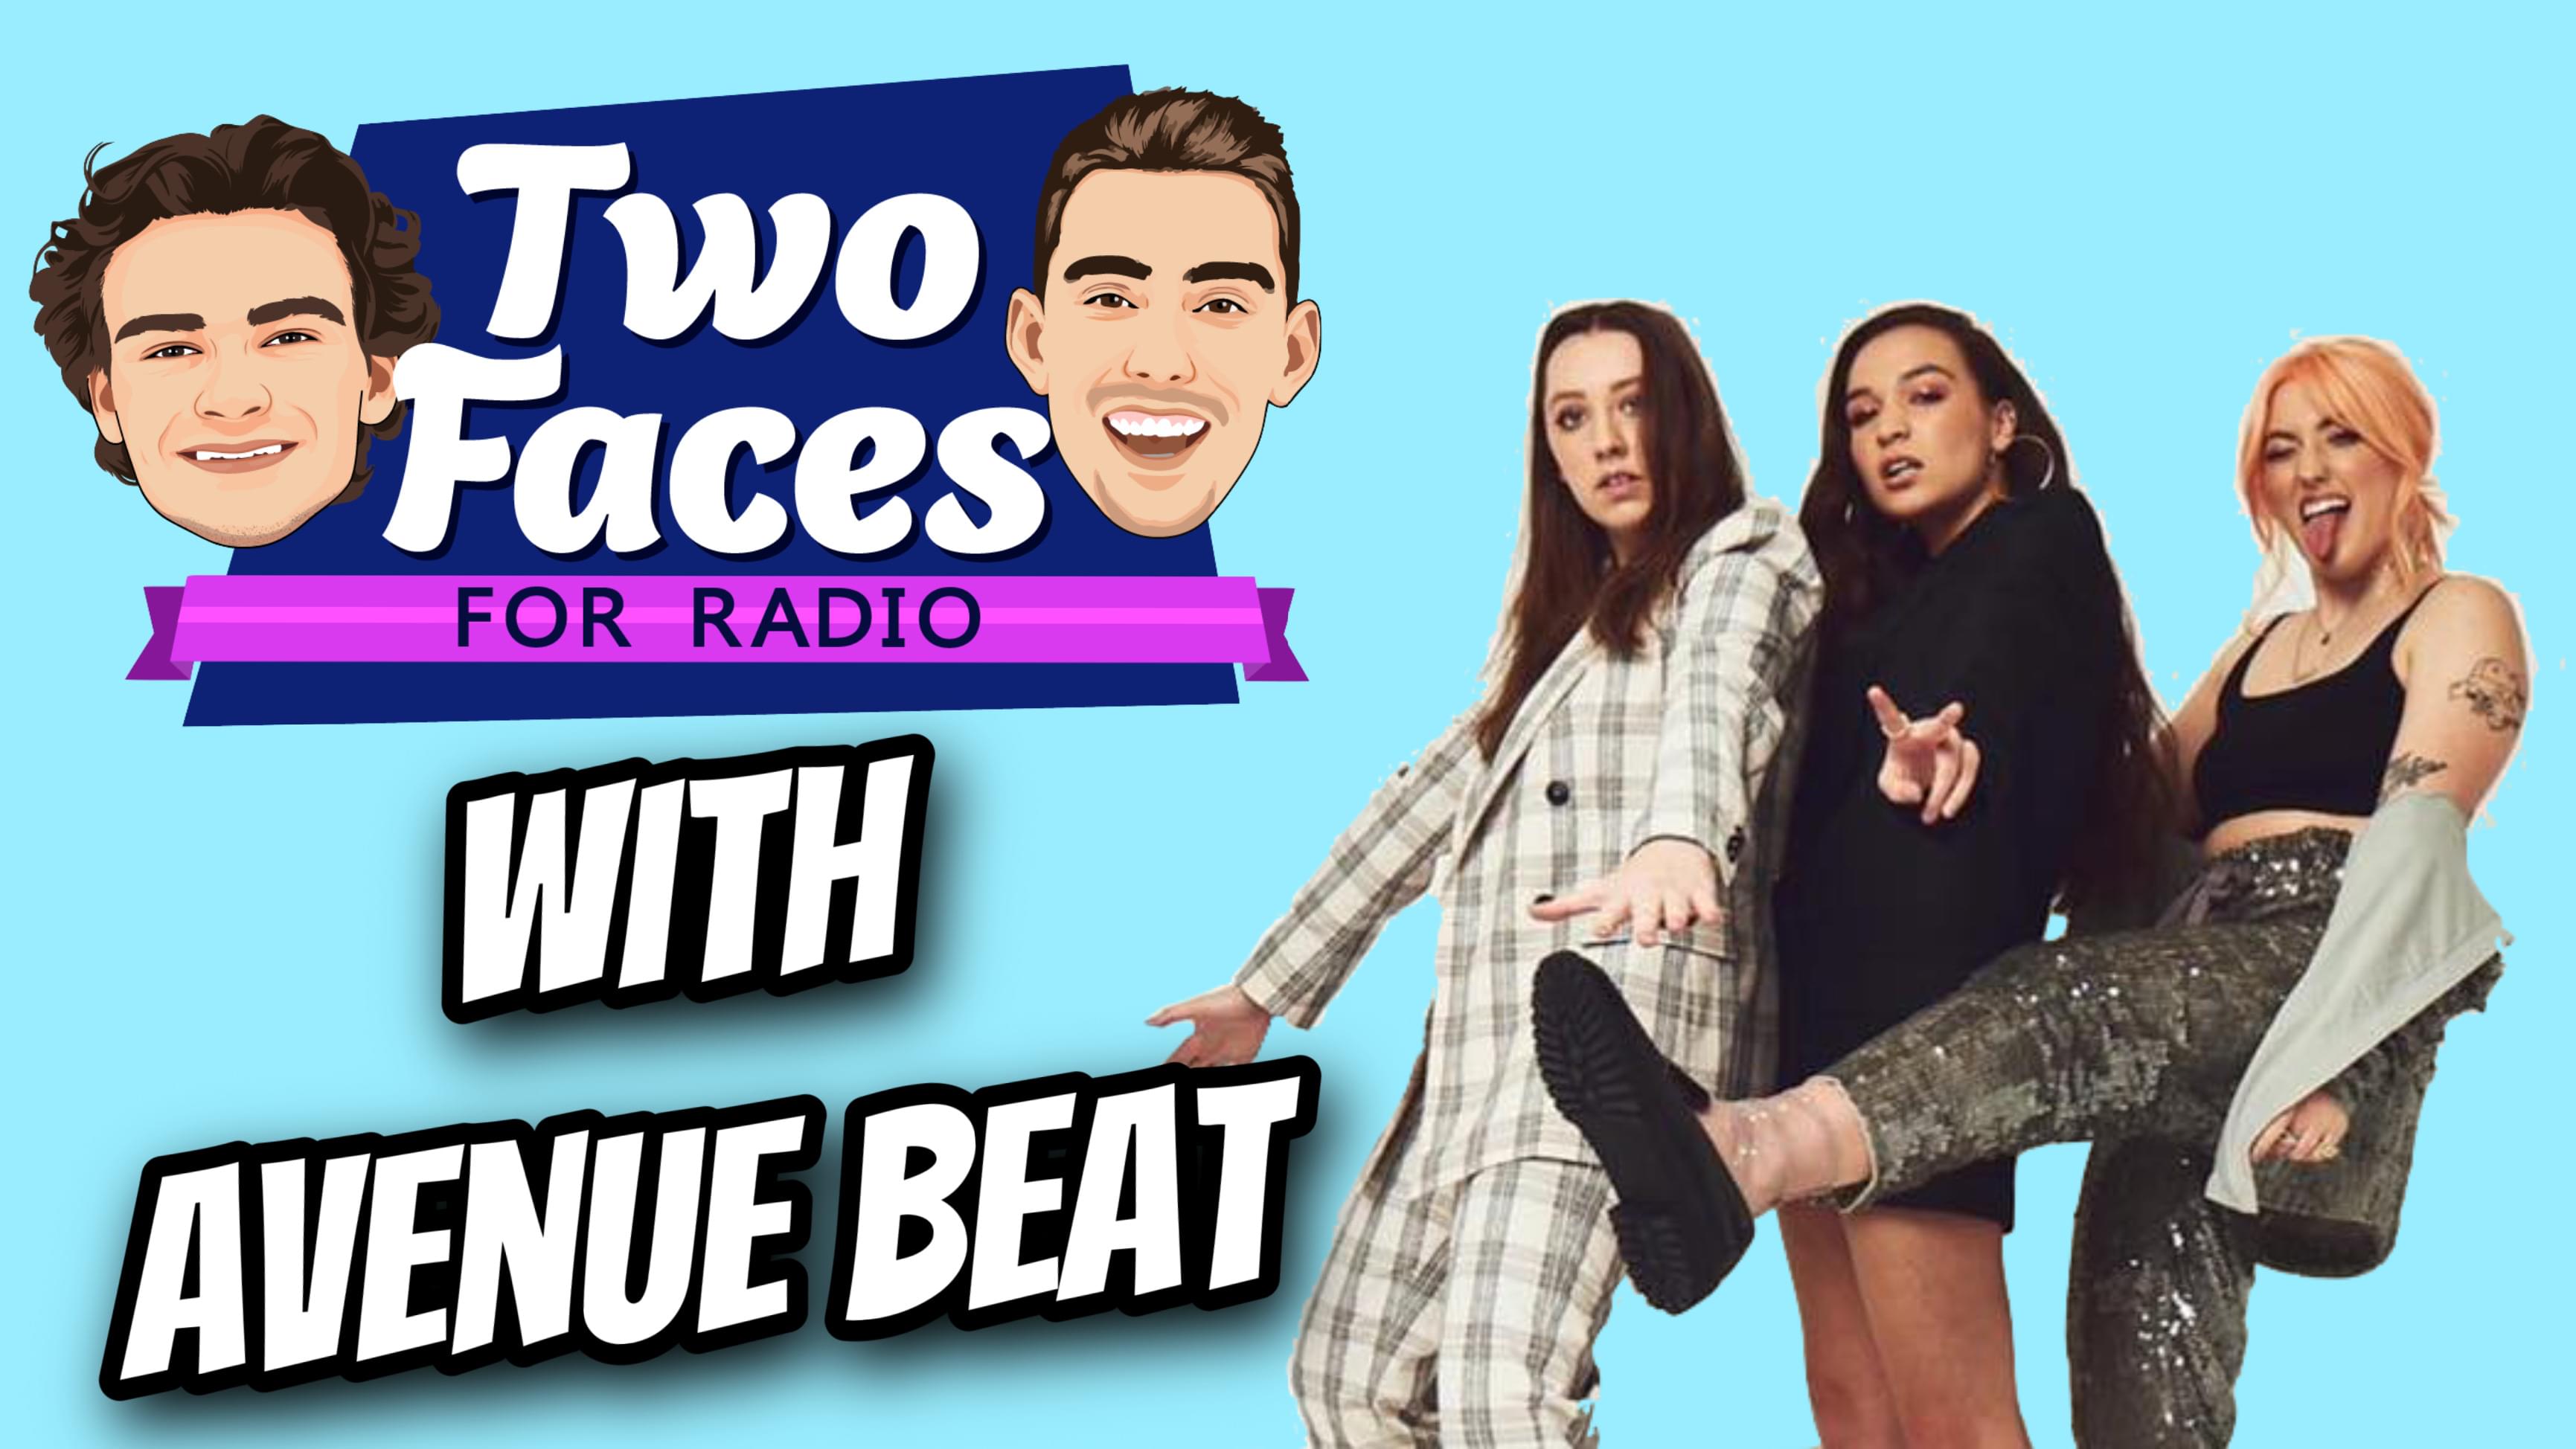 Avenue Beat Joins The ‘Two Faces For Radio’ Podcast [WATCH]